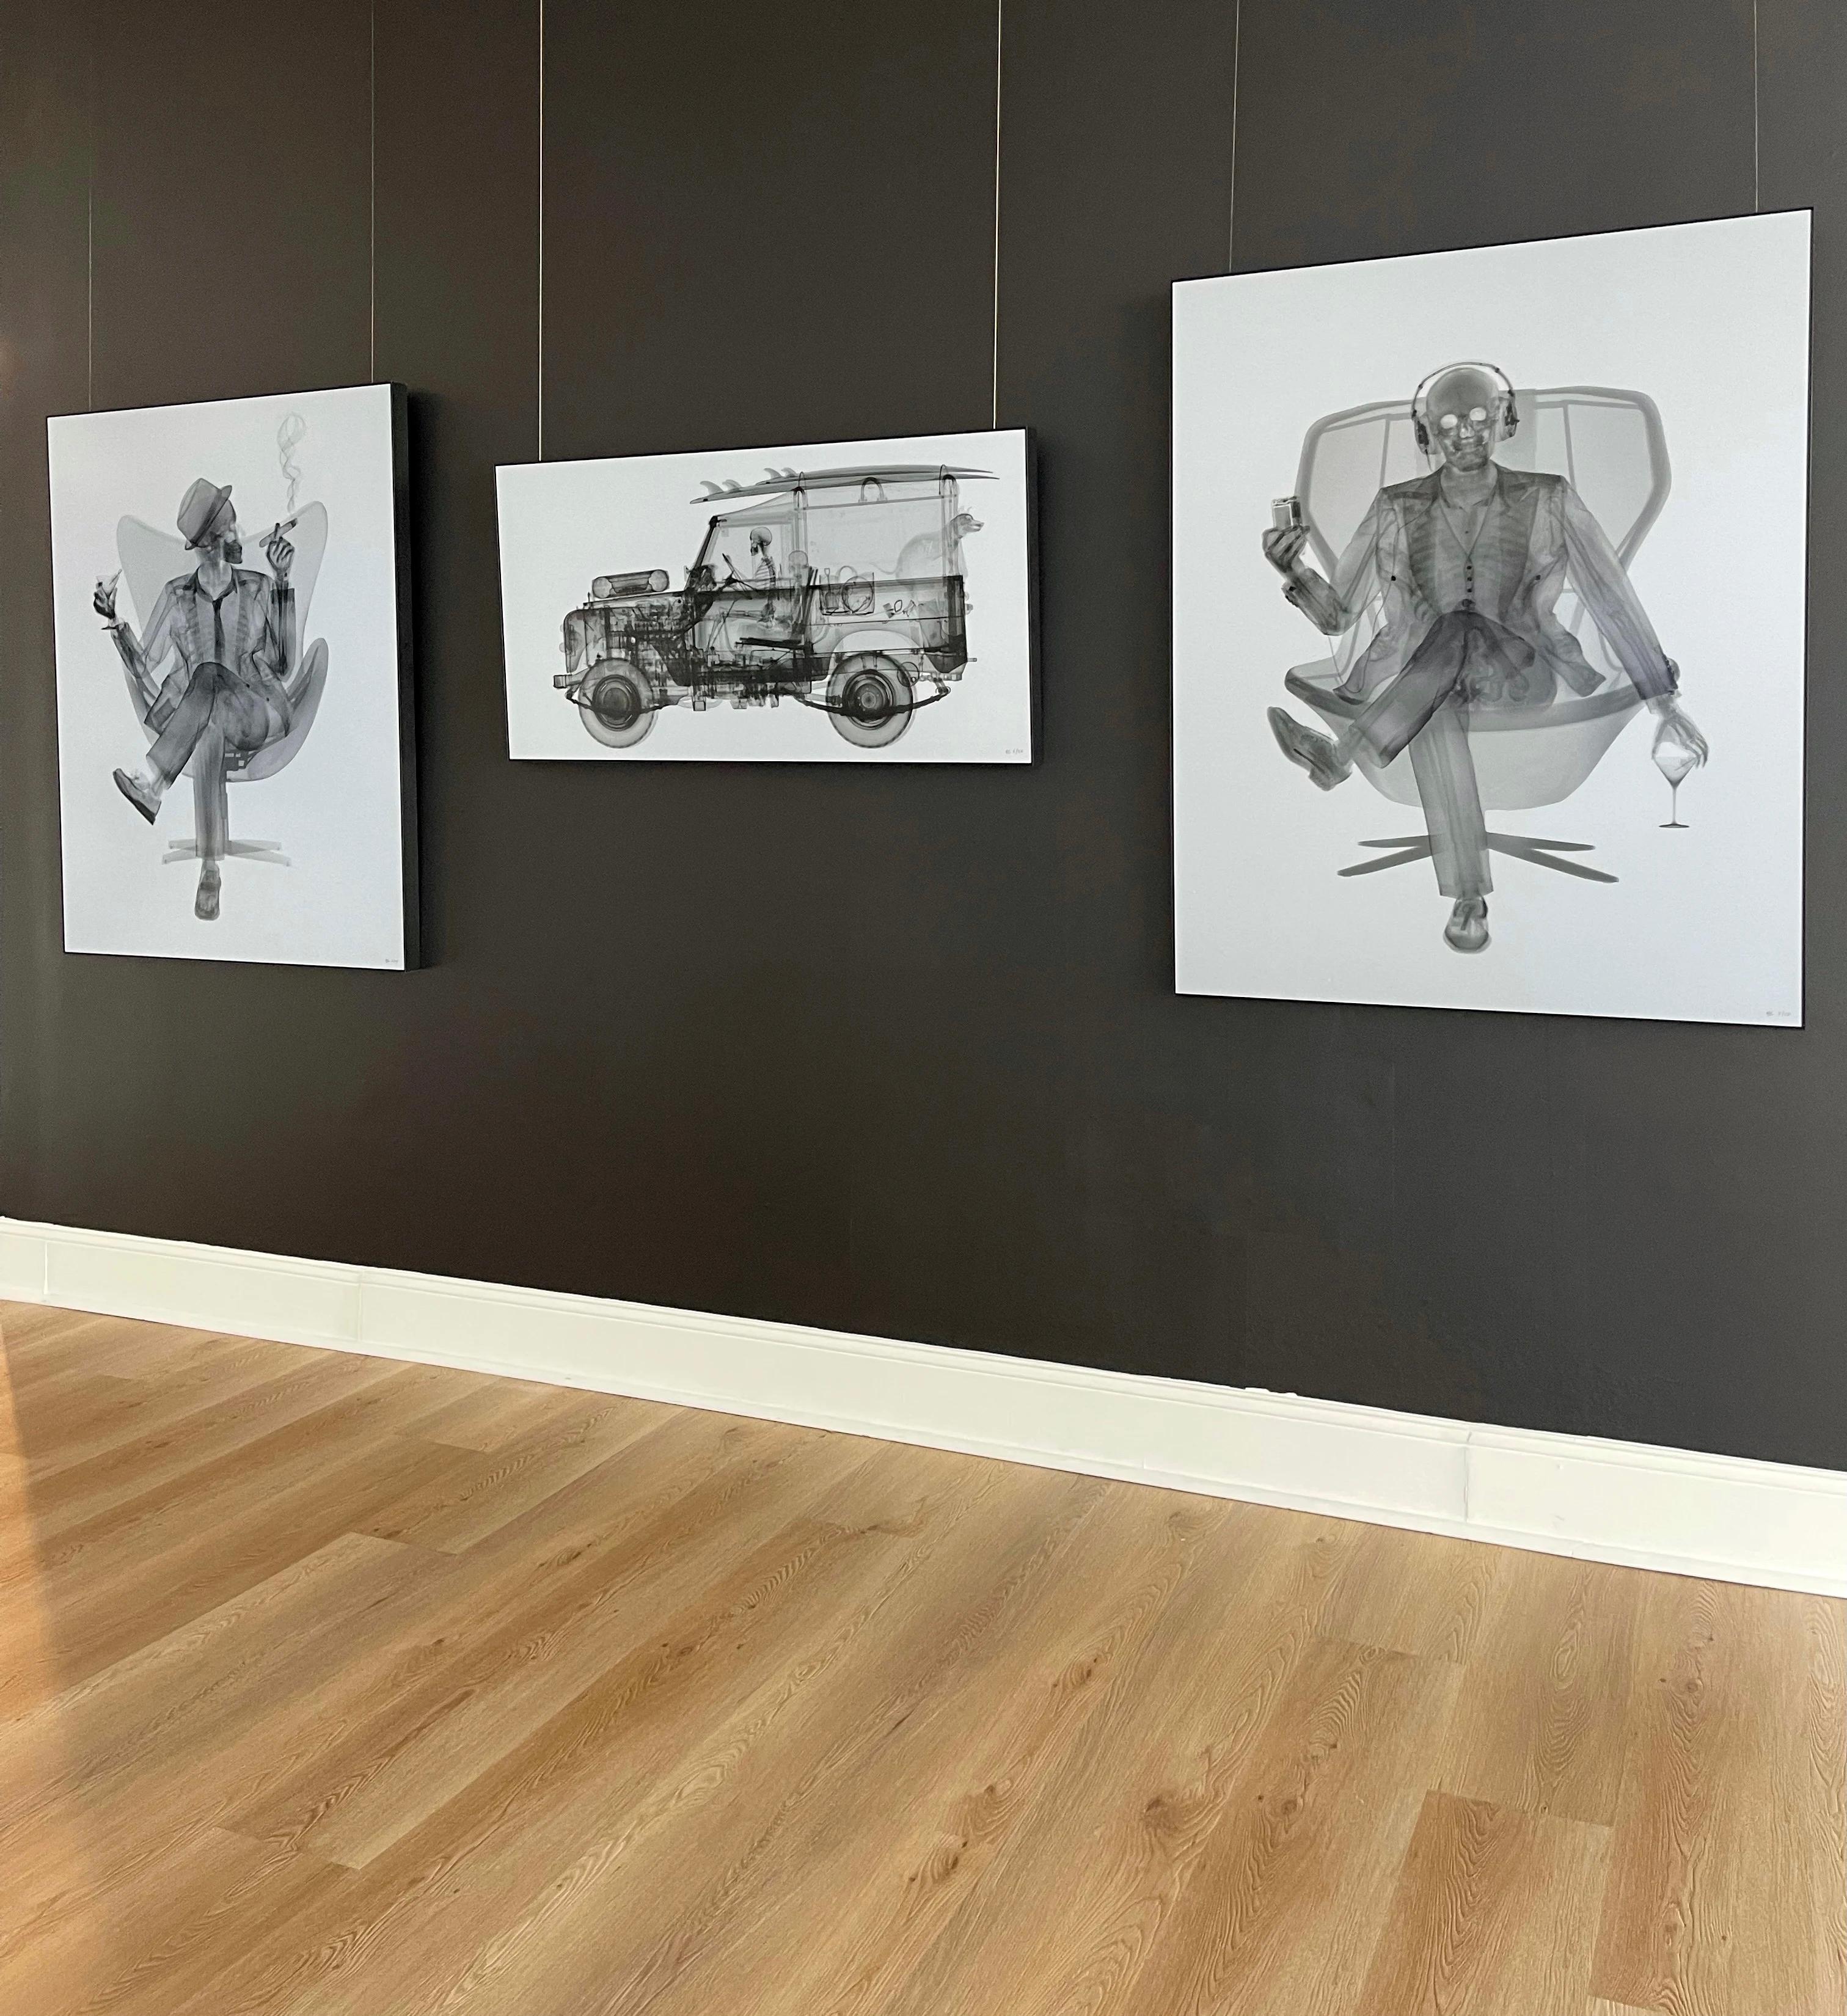 Nick Veasey
Easy Listener Mid Grey, 2020
29.5 x 23 inches, Edition of 25
50 x 40 inches, Edition of 15
59 x 47 inches, Edition of 9 
Digital C-type print mounted to dibond with matte plexi face and aluminum art box
Signed and numbered by